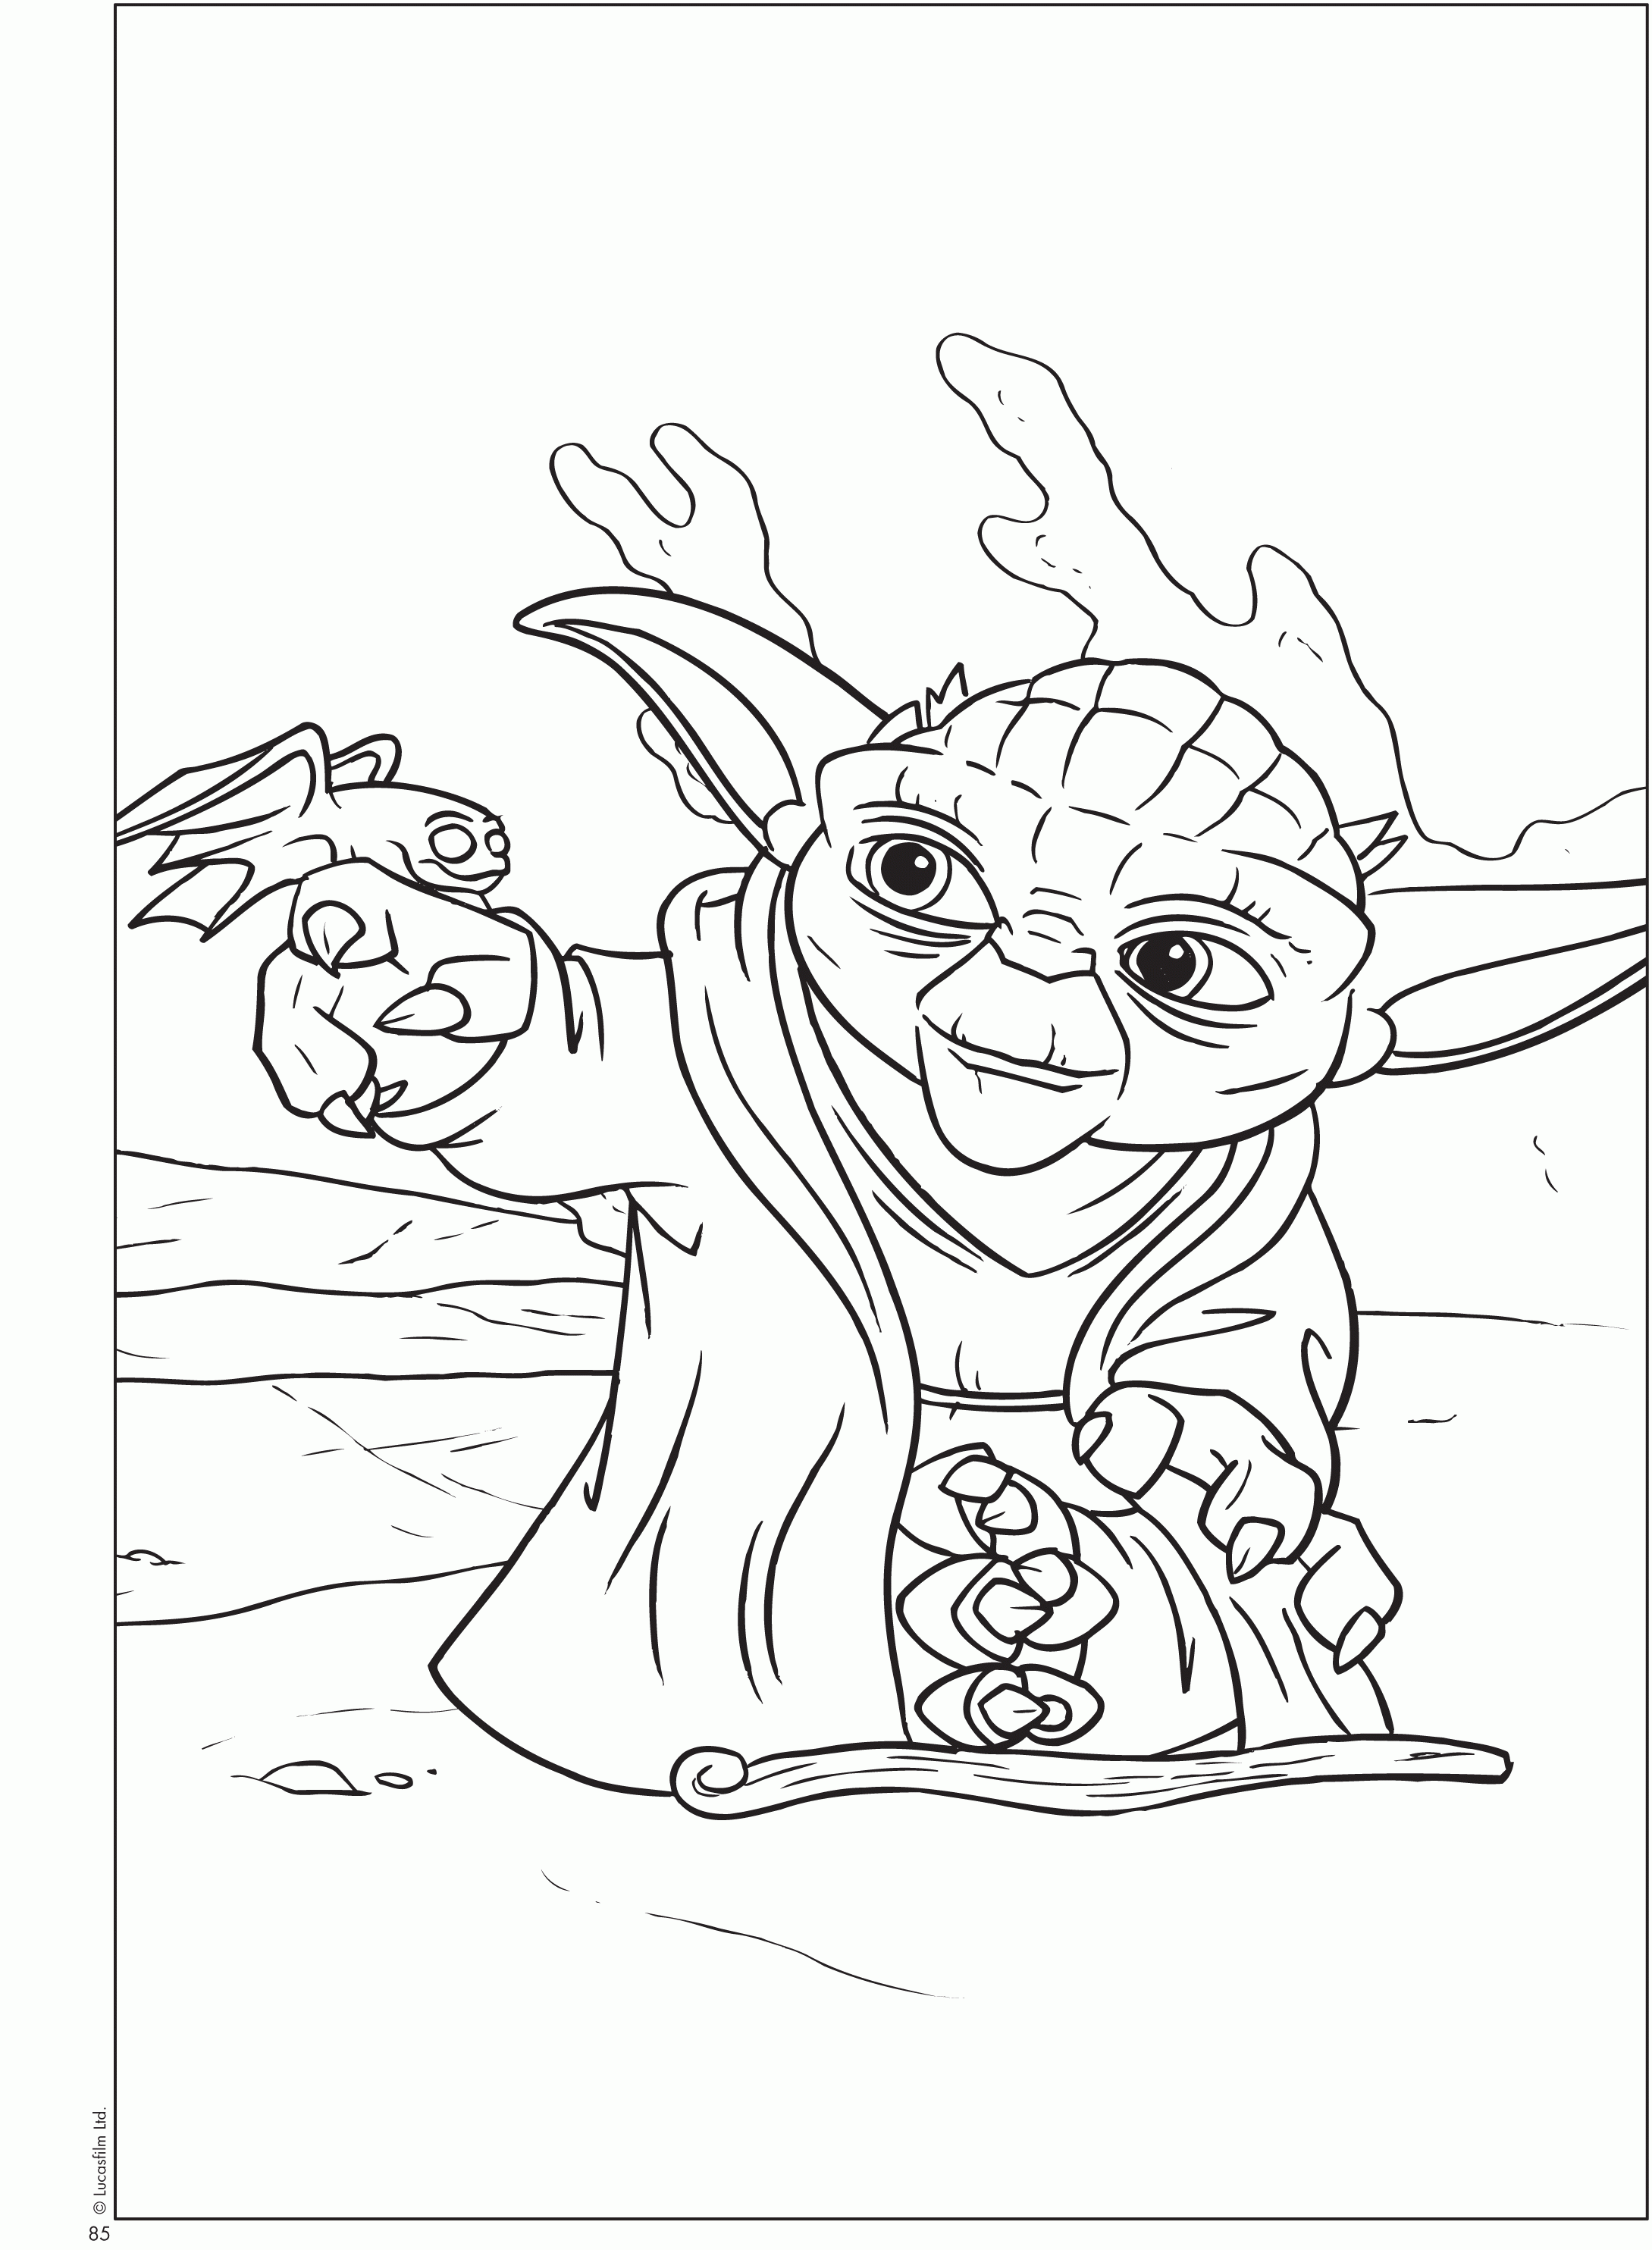 6 Best Images of Star Wars Printable Coloring Sheets - Star Wars ...